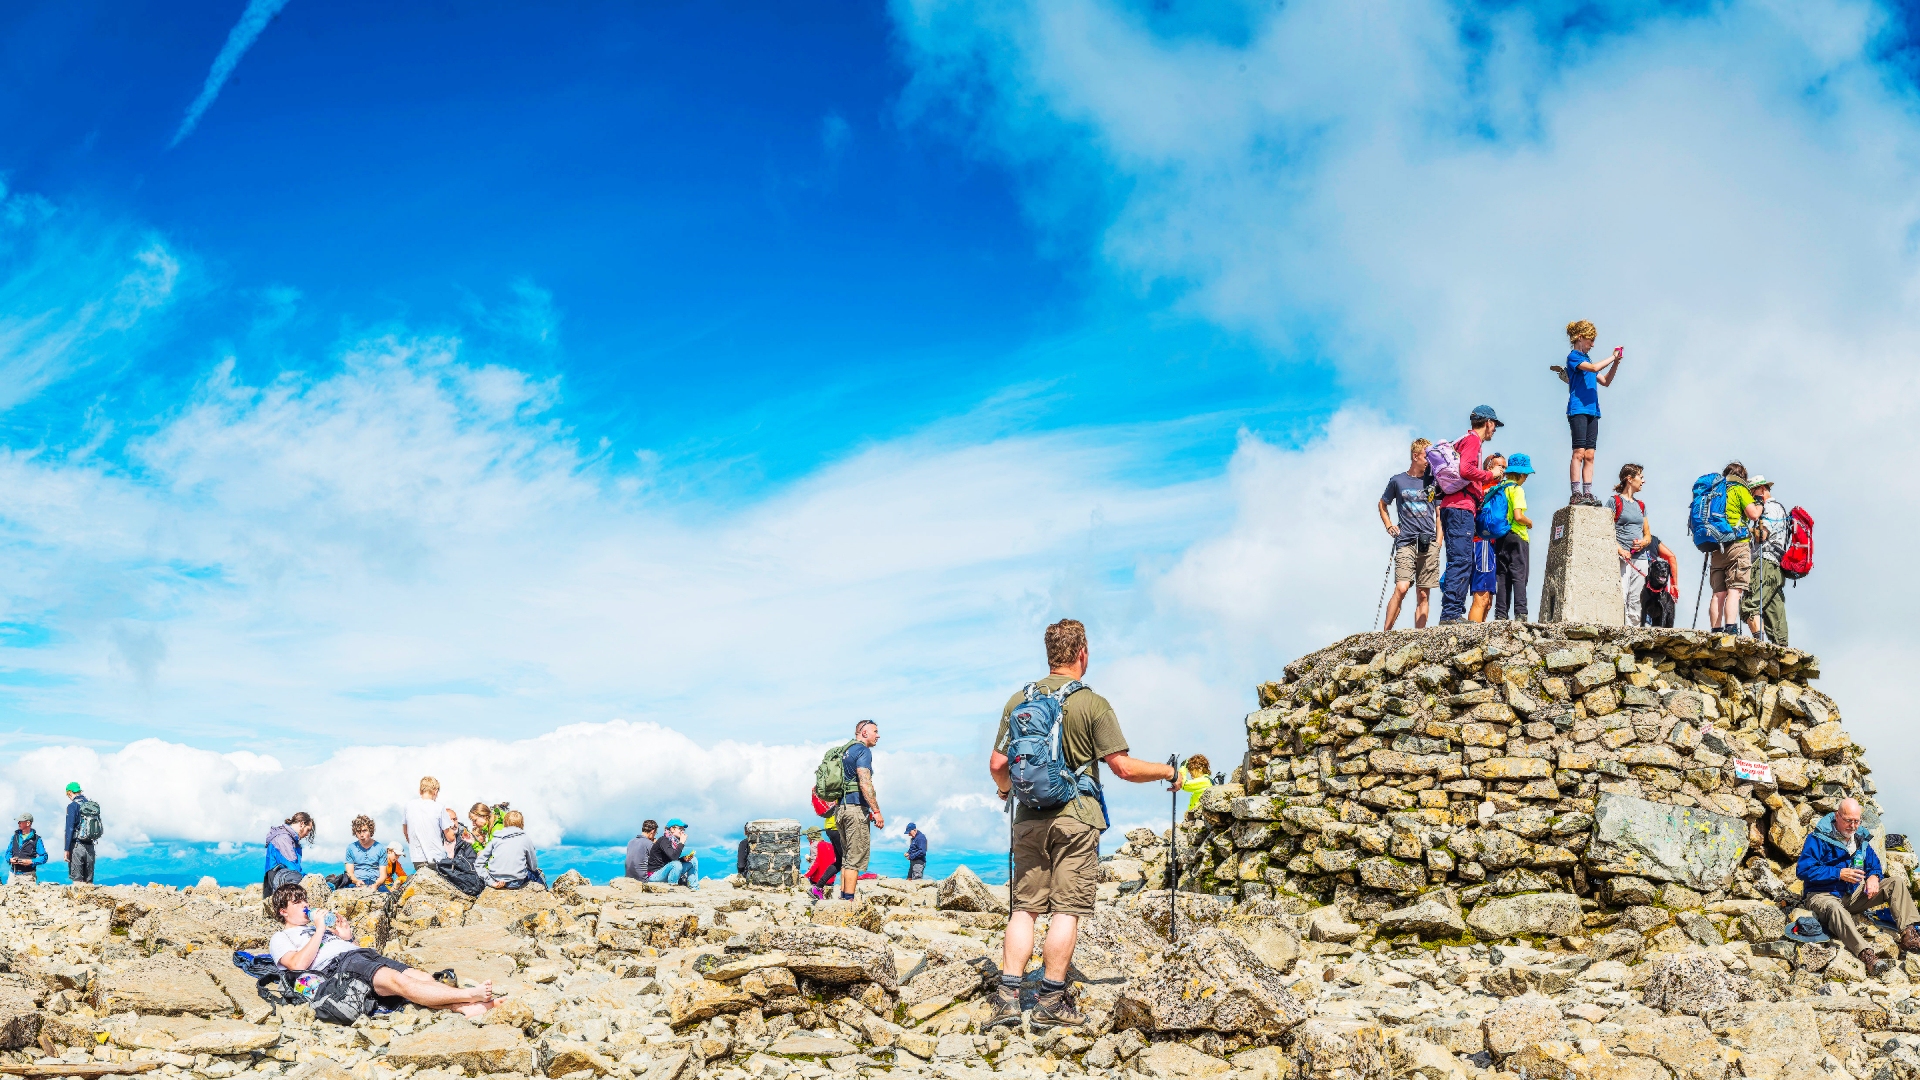 Crowds of hikers enjoying the summer sunshine on the summit of Ben Nevis, Britain's highest mountain.